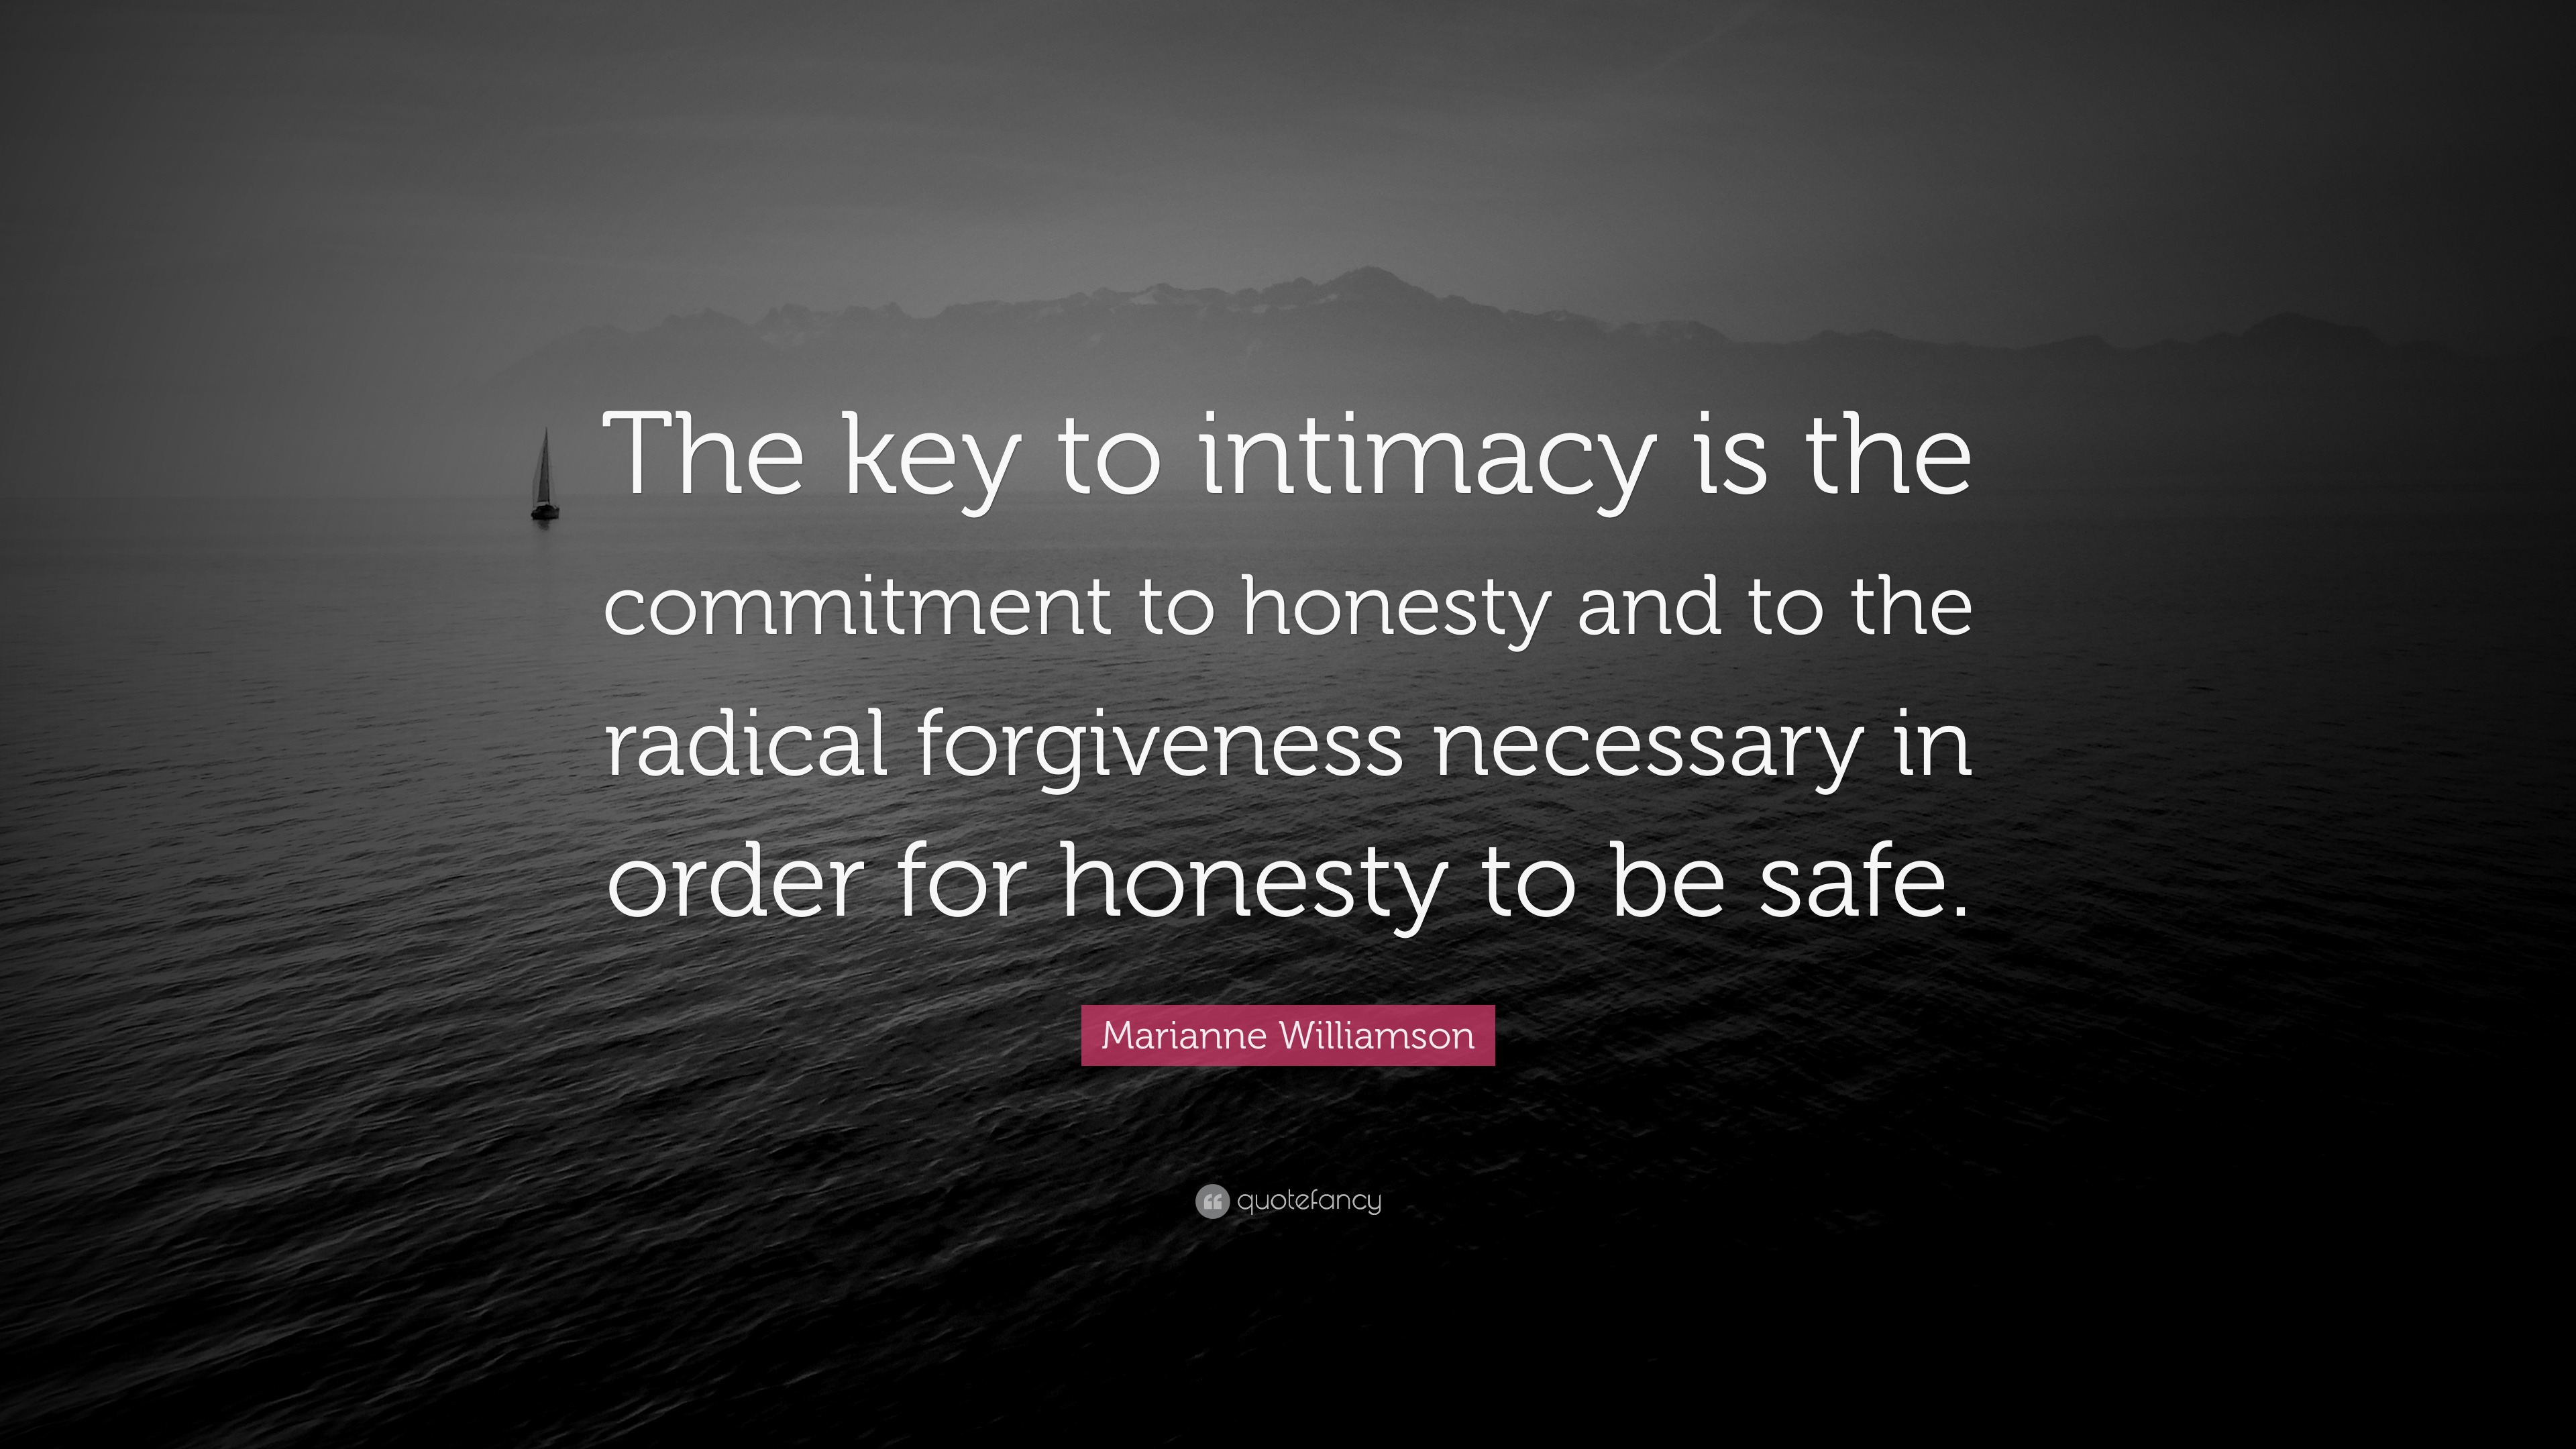 Marianne Williamson Quote: “The key to intimacy is the commitment to  honesty and to the radical forgiveness necessary in order for honesty to be  saf”